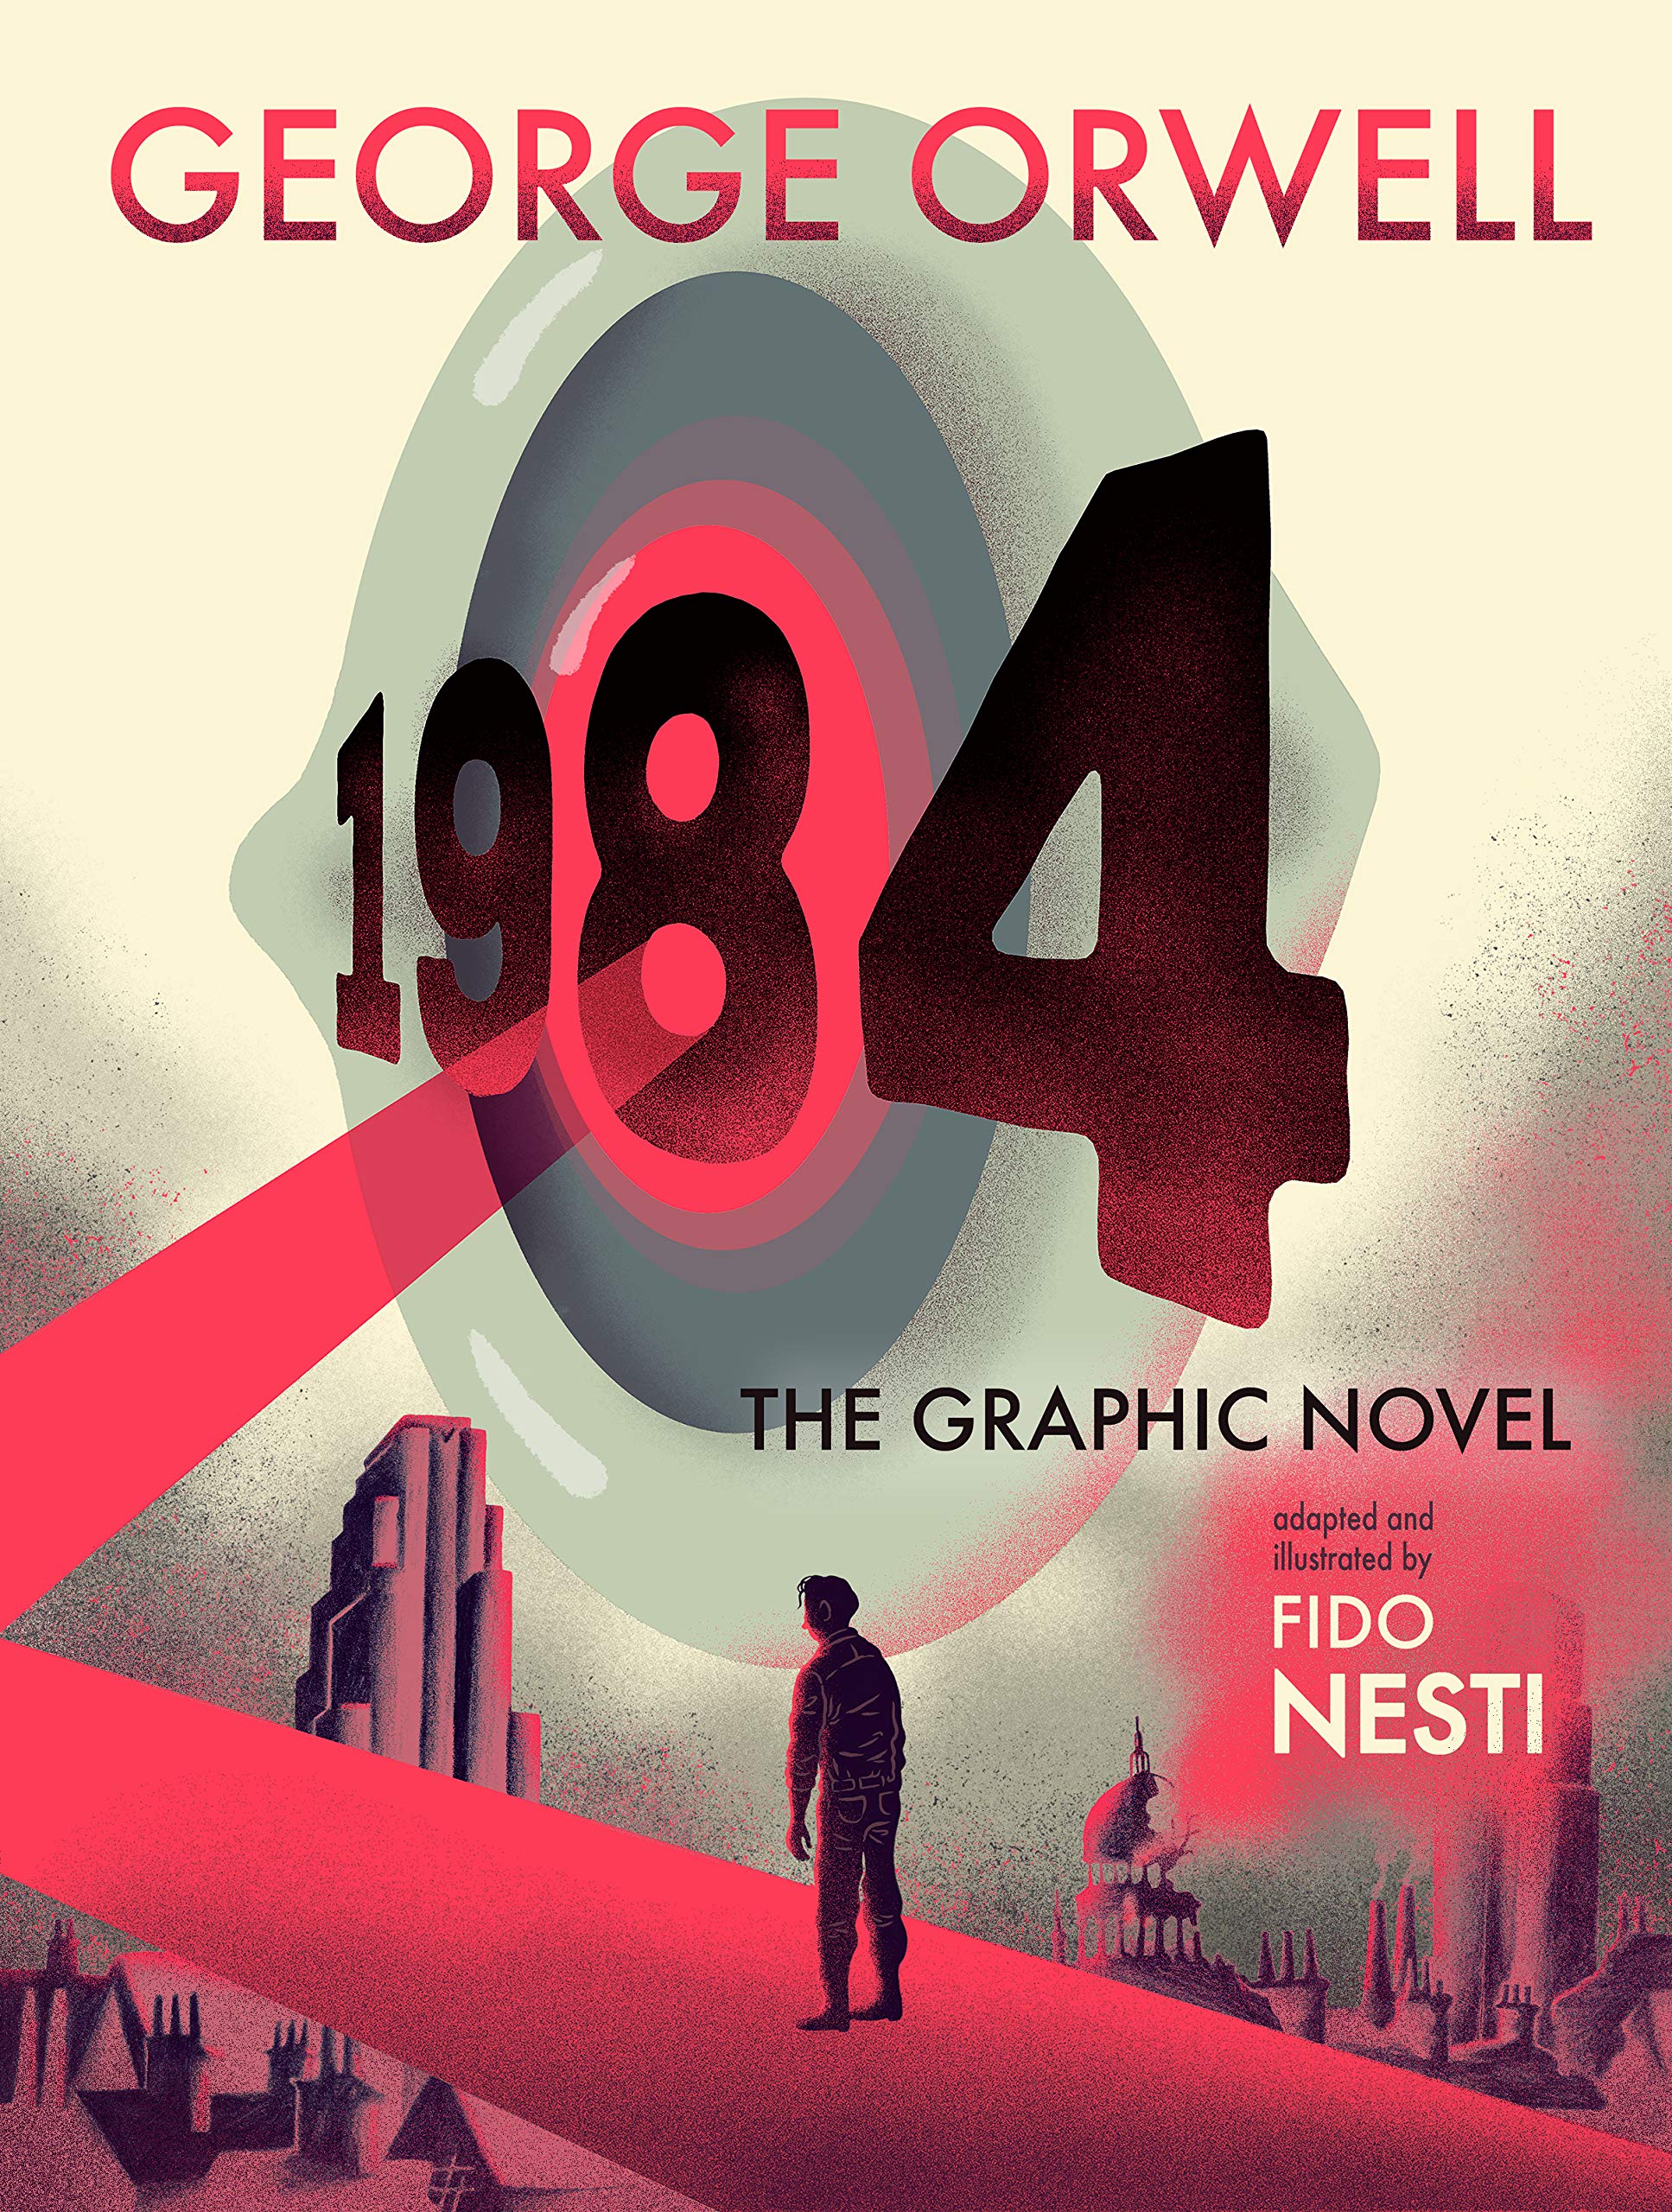 review book 1984